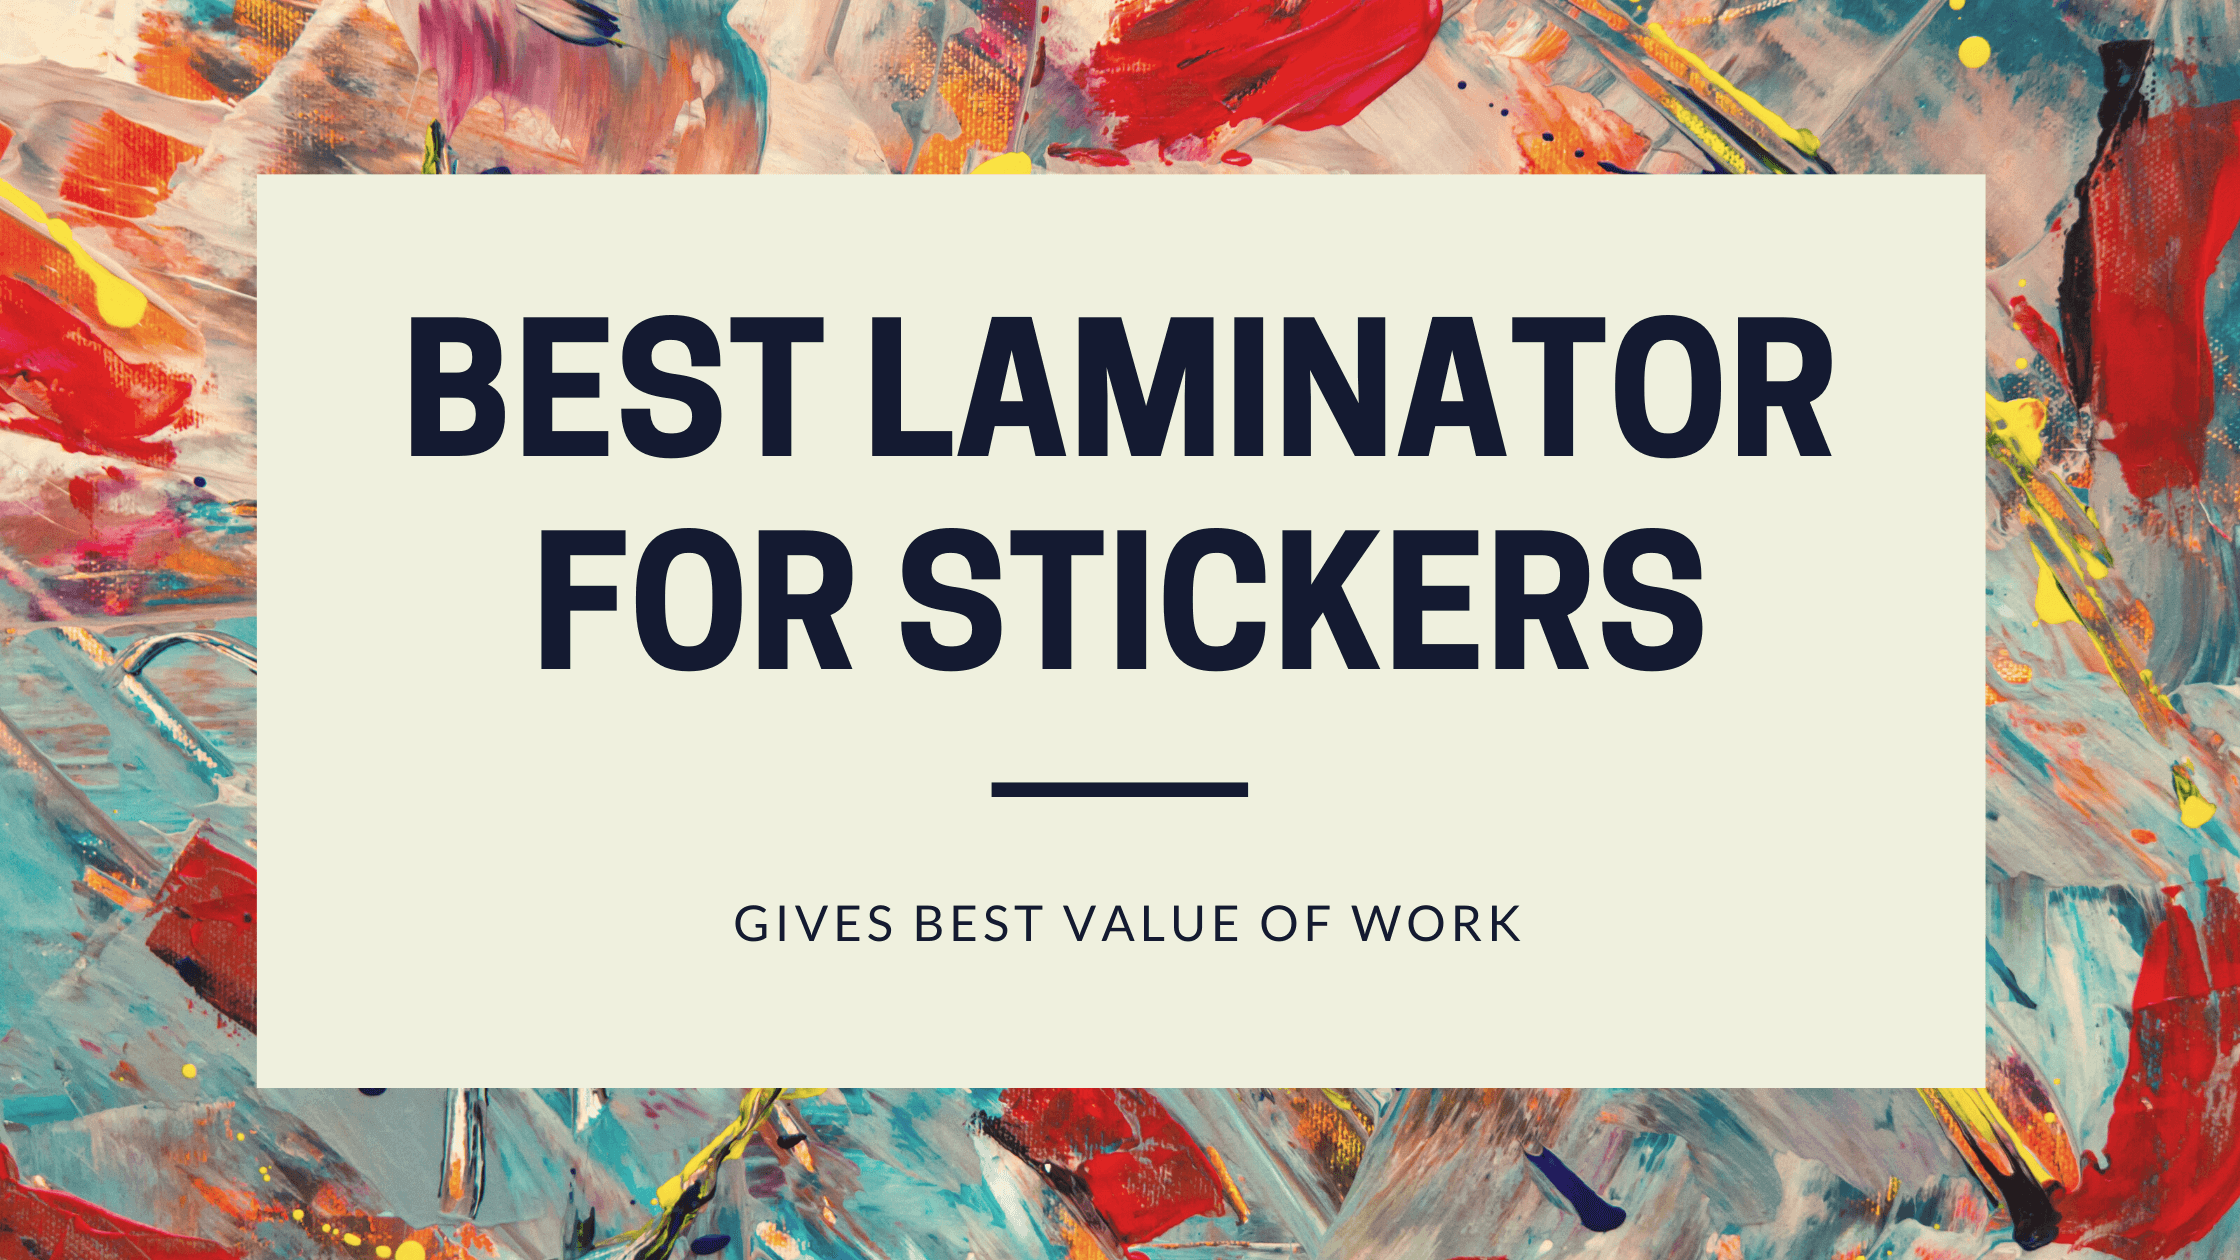 Best laminator for stickers